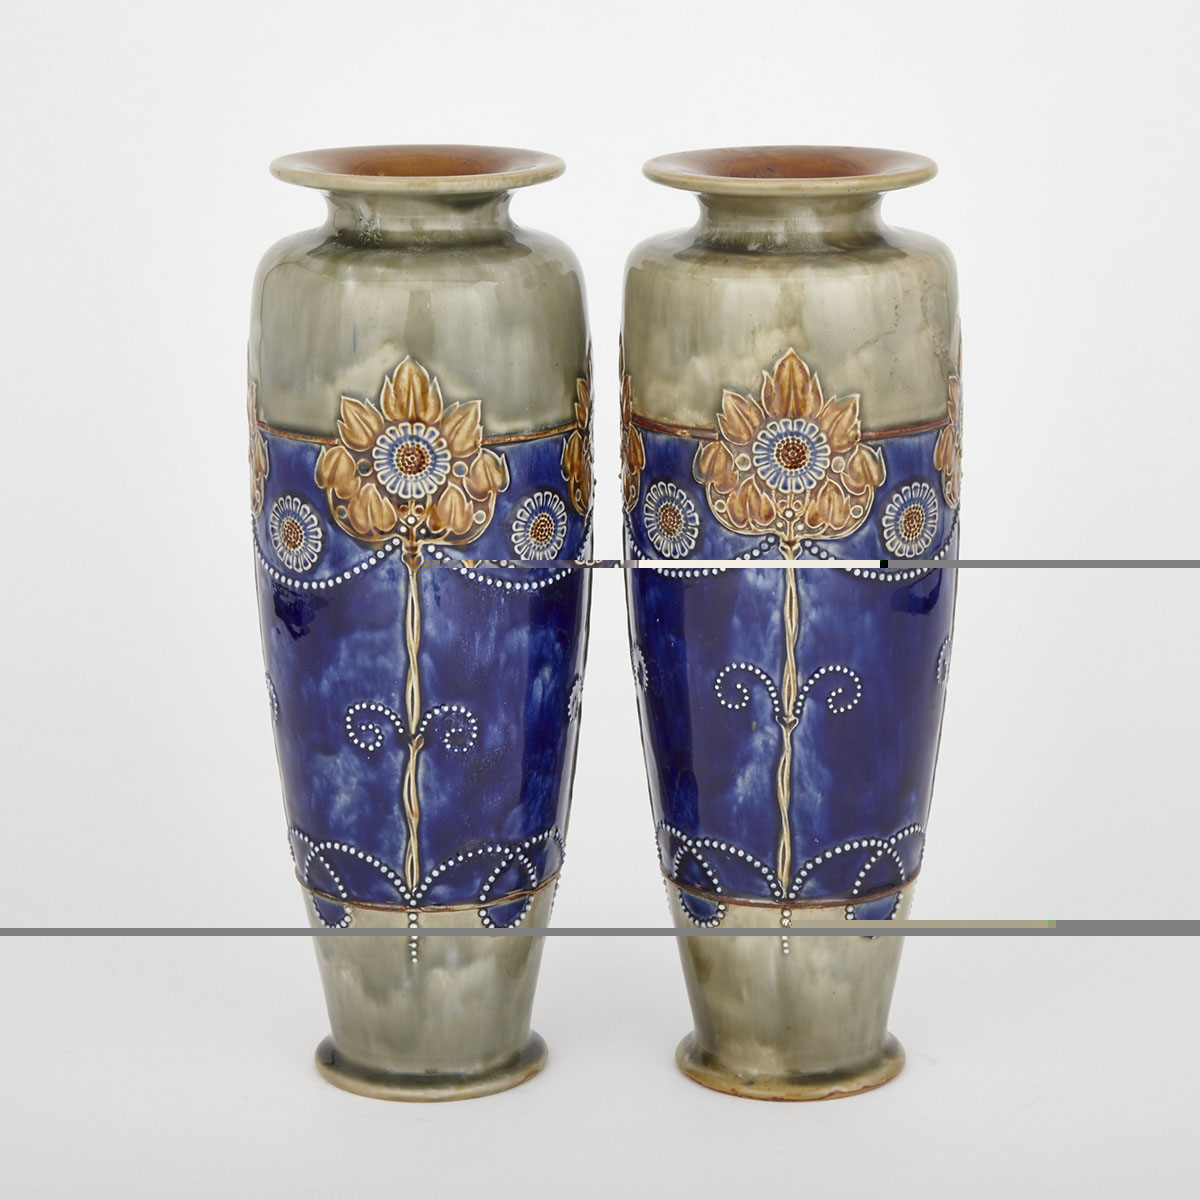 Pair of Royal Doulton Stoneware Large Vases, early 20th century